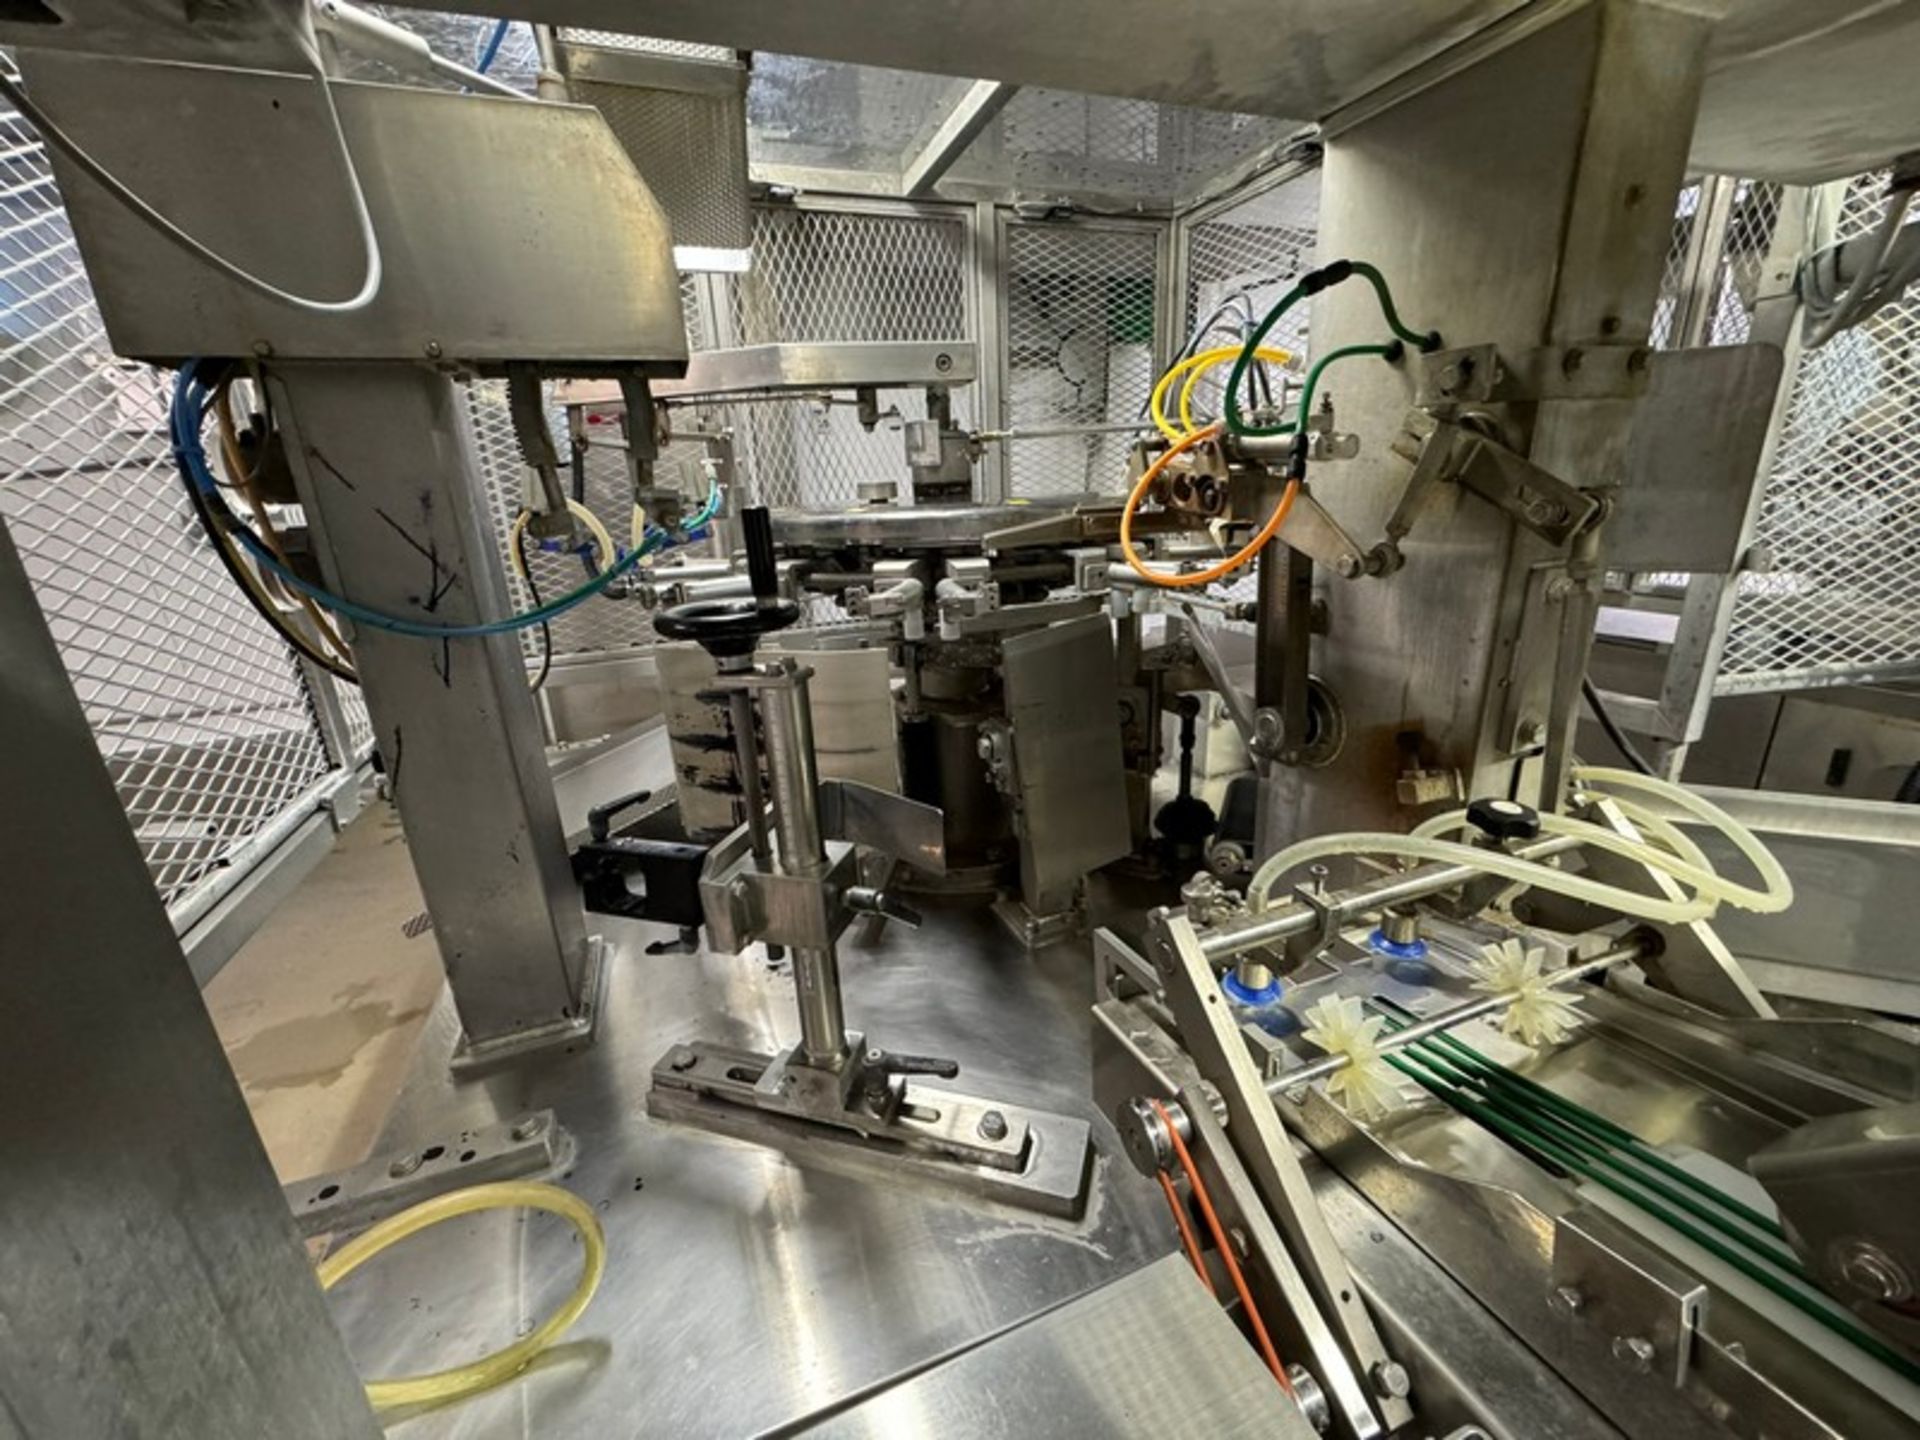 2008 Toyo JIDIKI Co, 8-Head Rotary Pouch Filler, M/N IT-8CN, Machine No. 2913, with Infeed & - Image 7 of 16